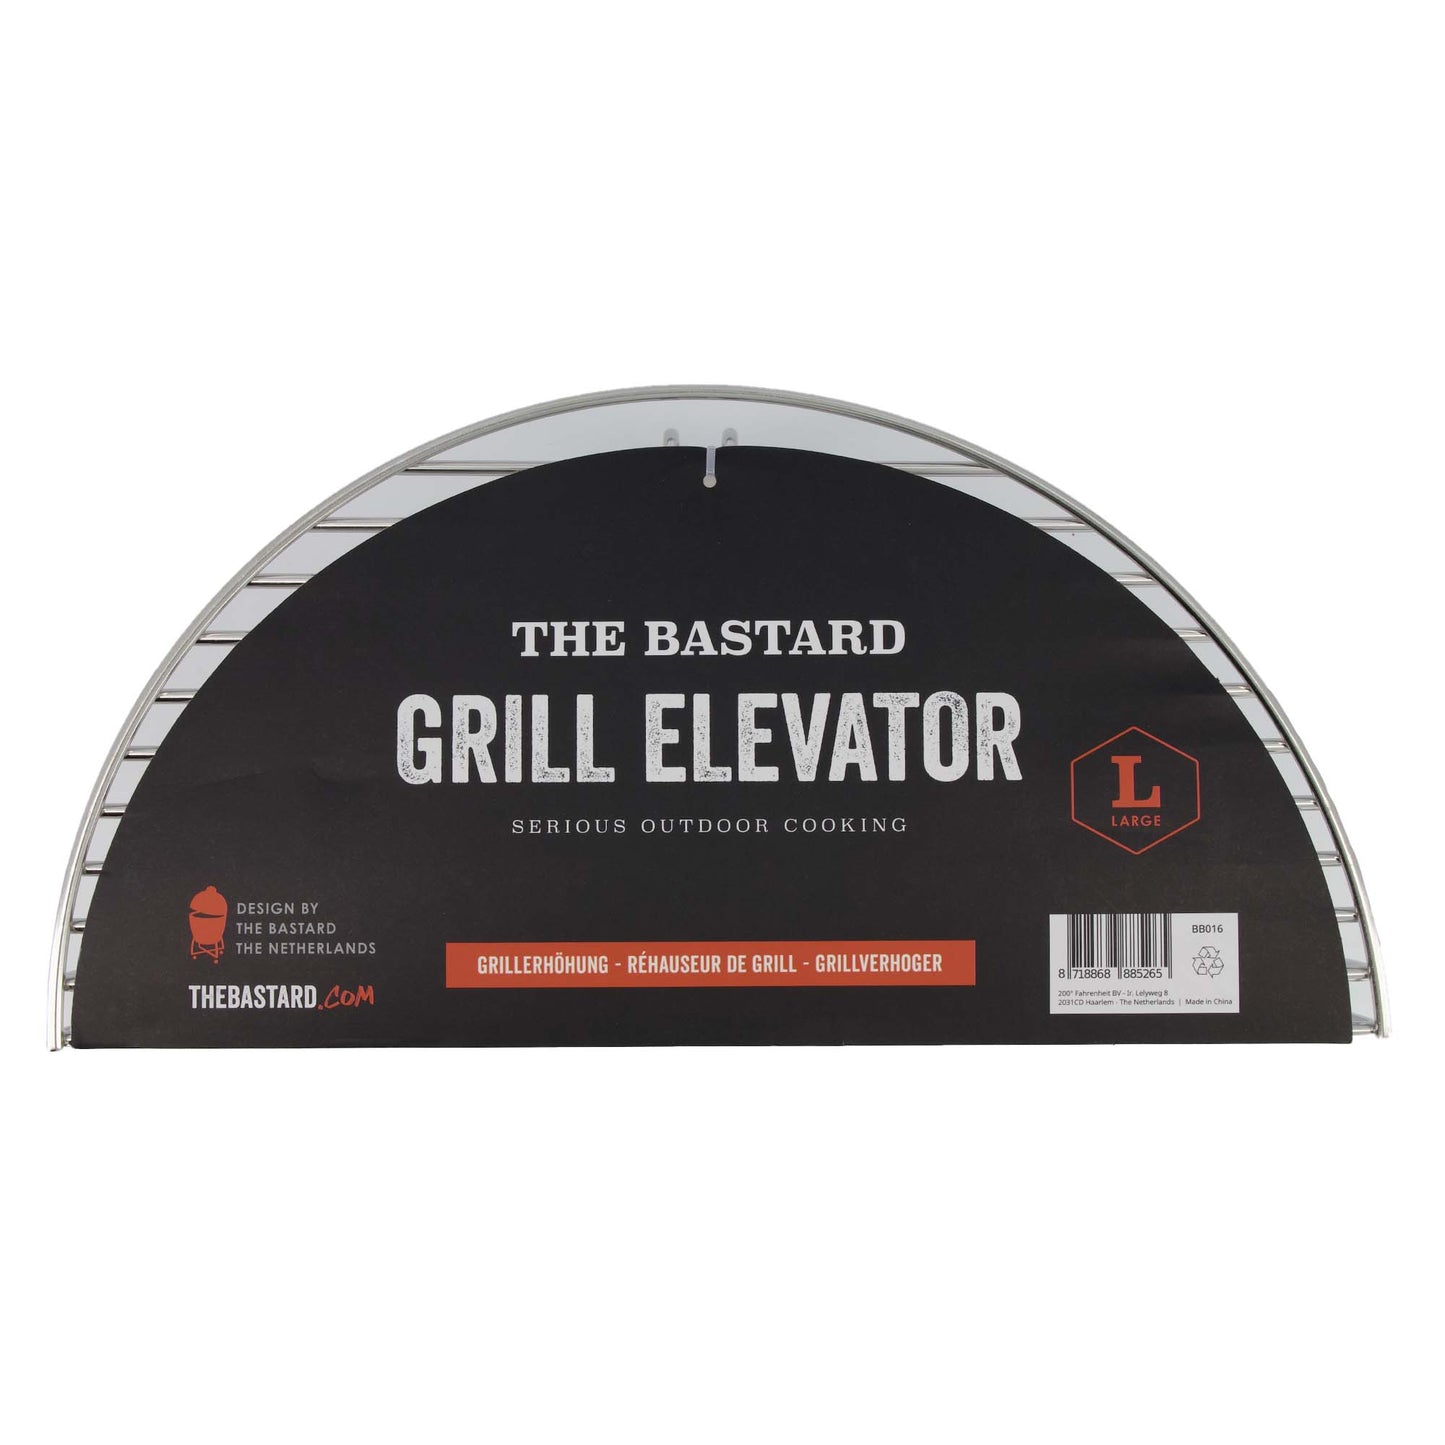 The Bastard Grill Elevator - Compact